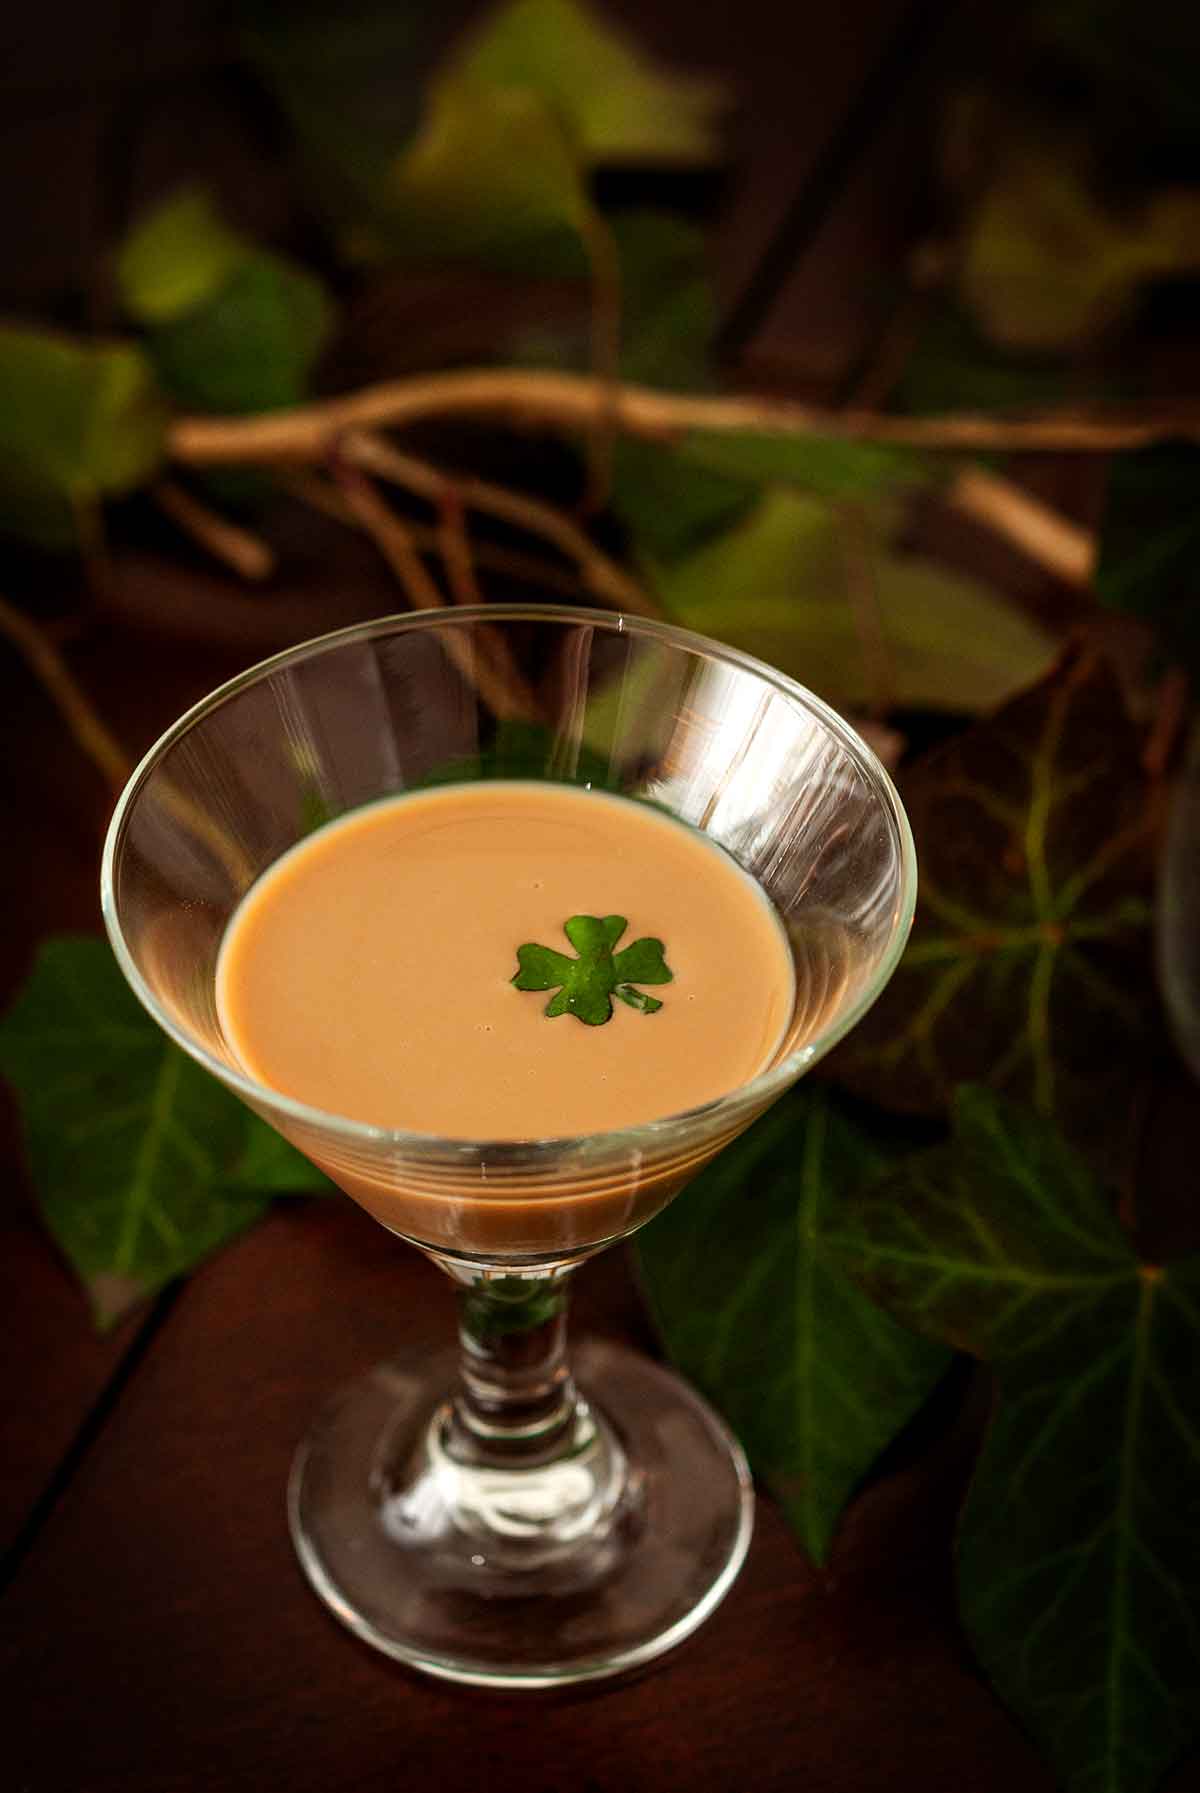 A small glass of a cream cocktail garnished with a basil clover, surrounded by ivy.